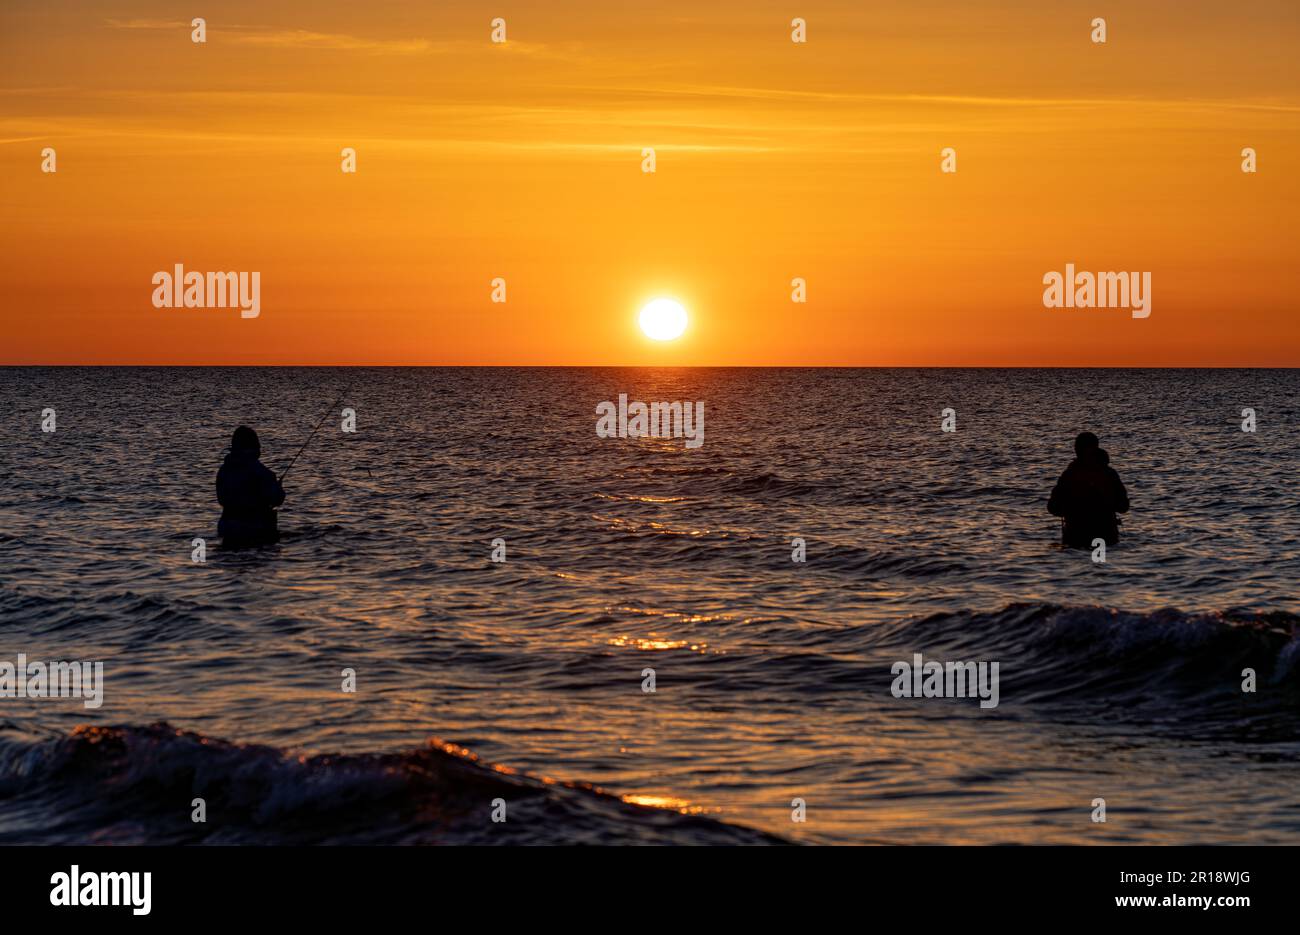 The silhouettes of two anglers in waterproof trousers fishing in front of a dreamy orange sunset in the Baltic Sea. They are standing in the middle of Stock Photo